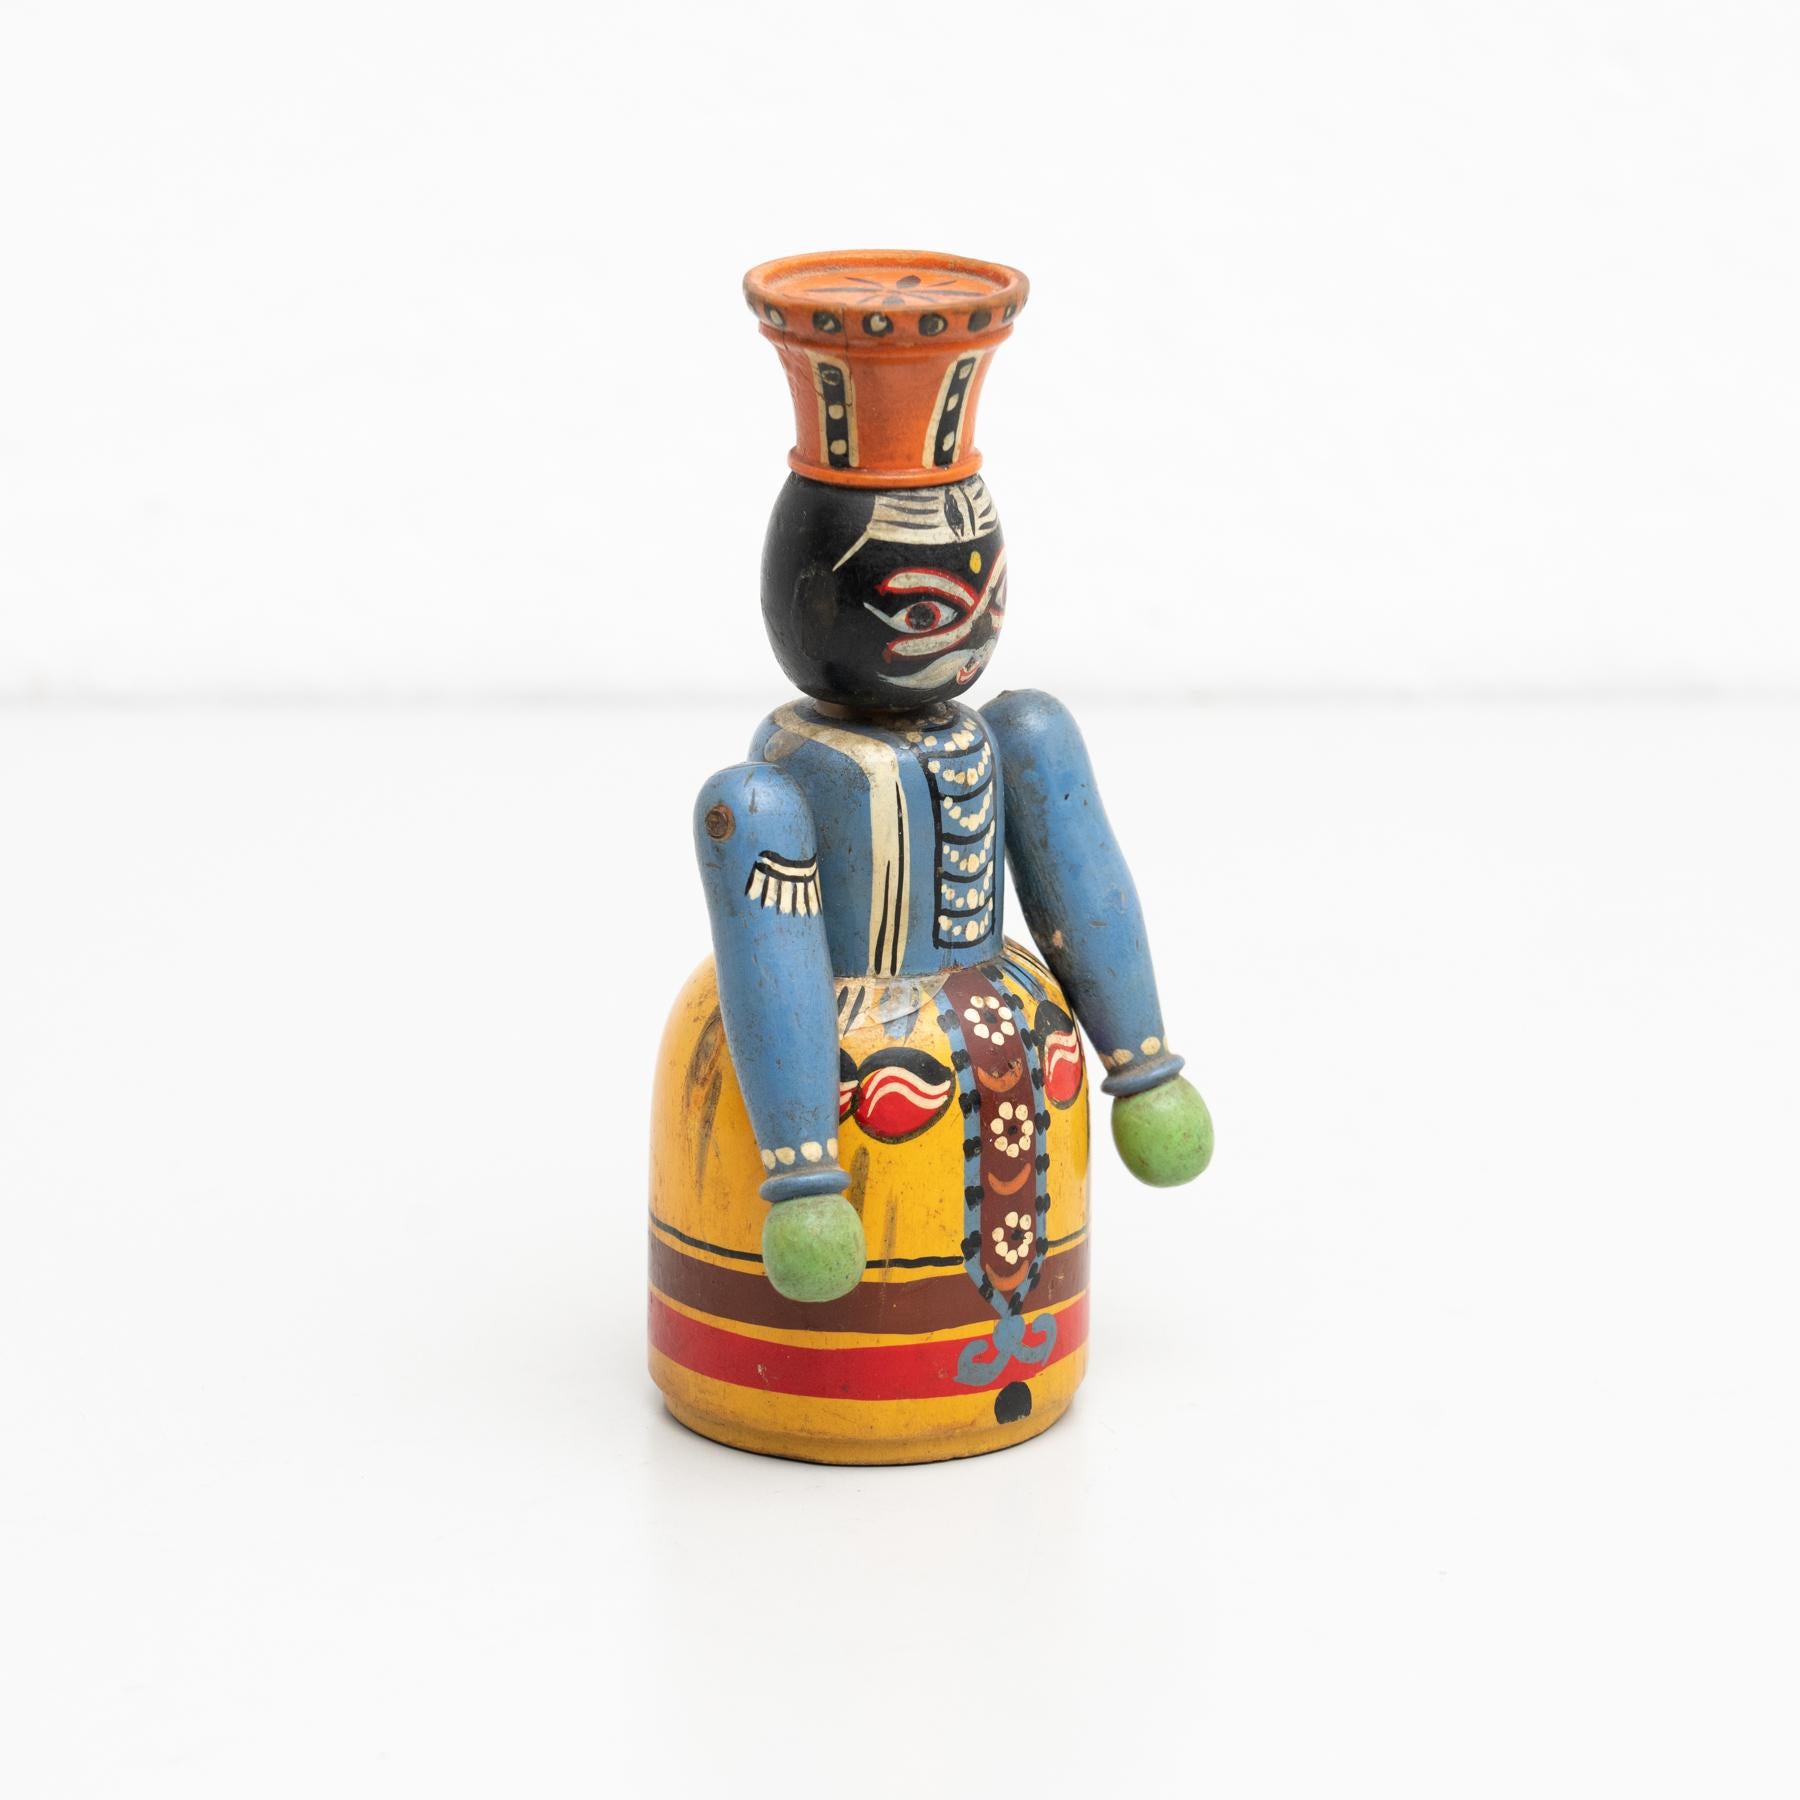 Vintage Hand-Painted Wooden Figure 2